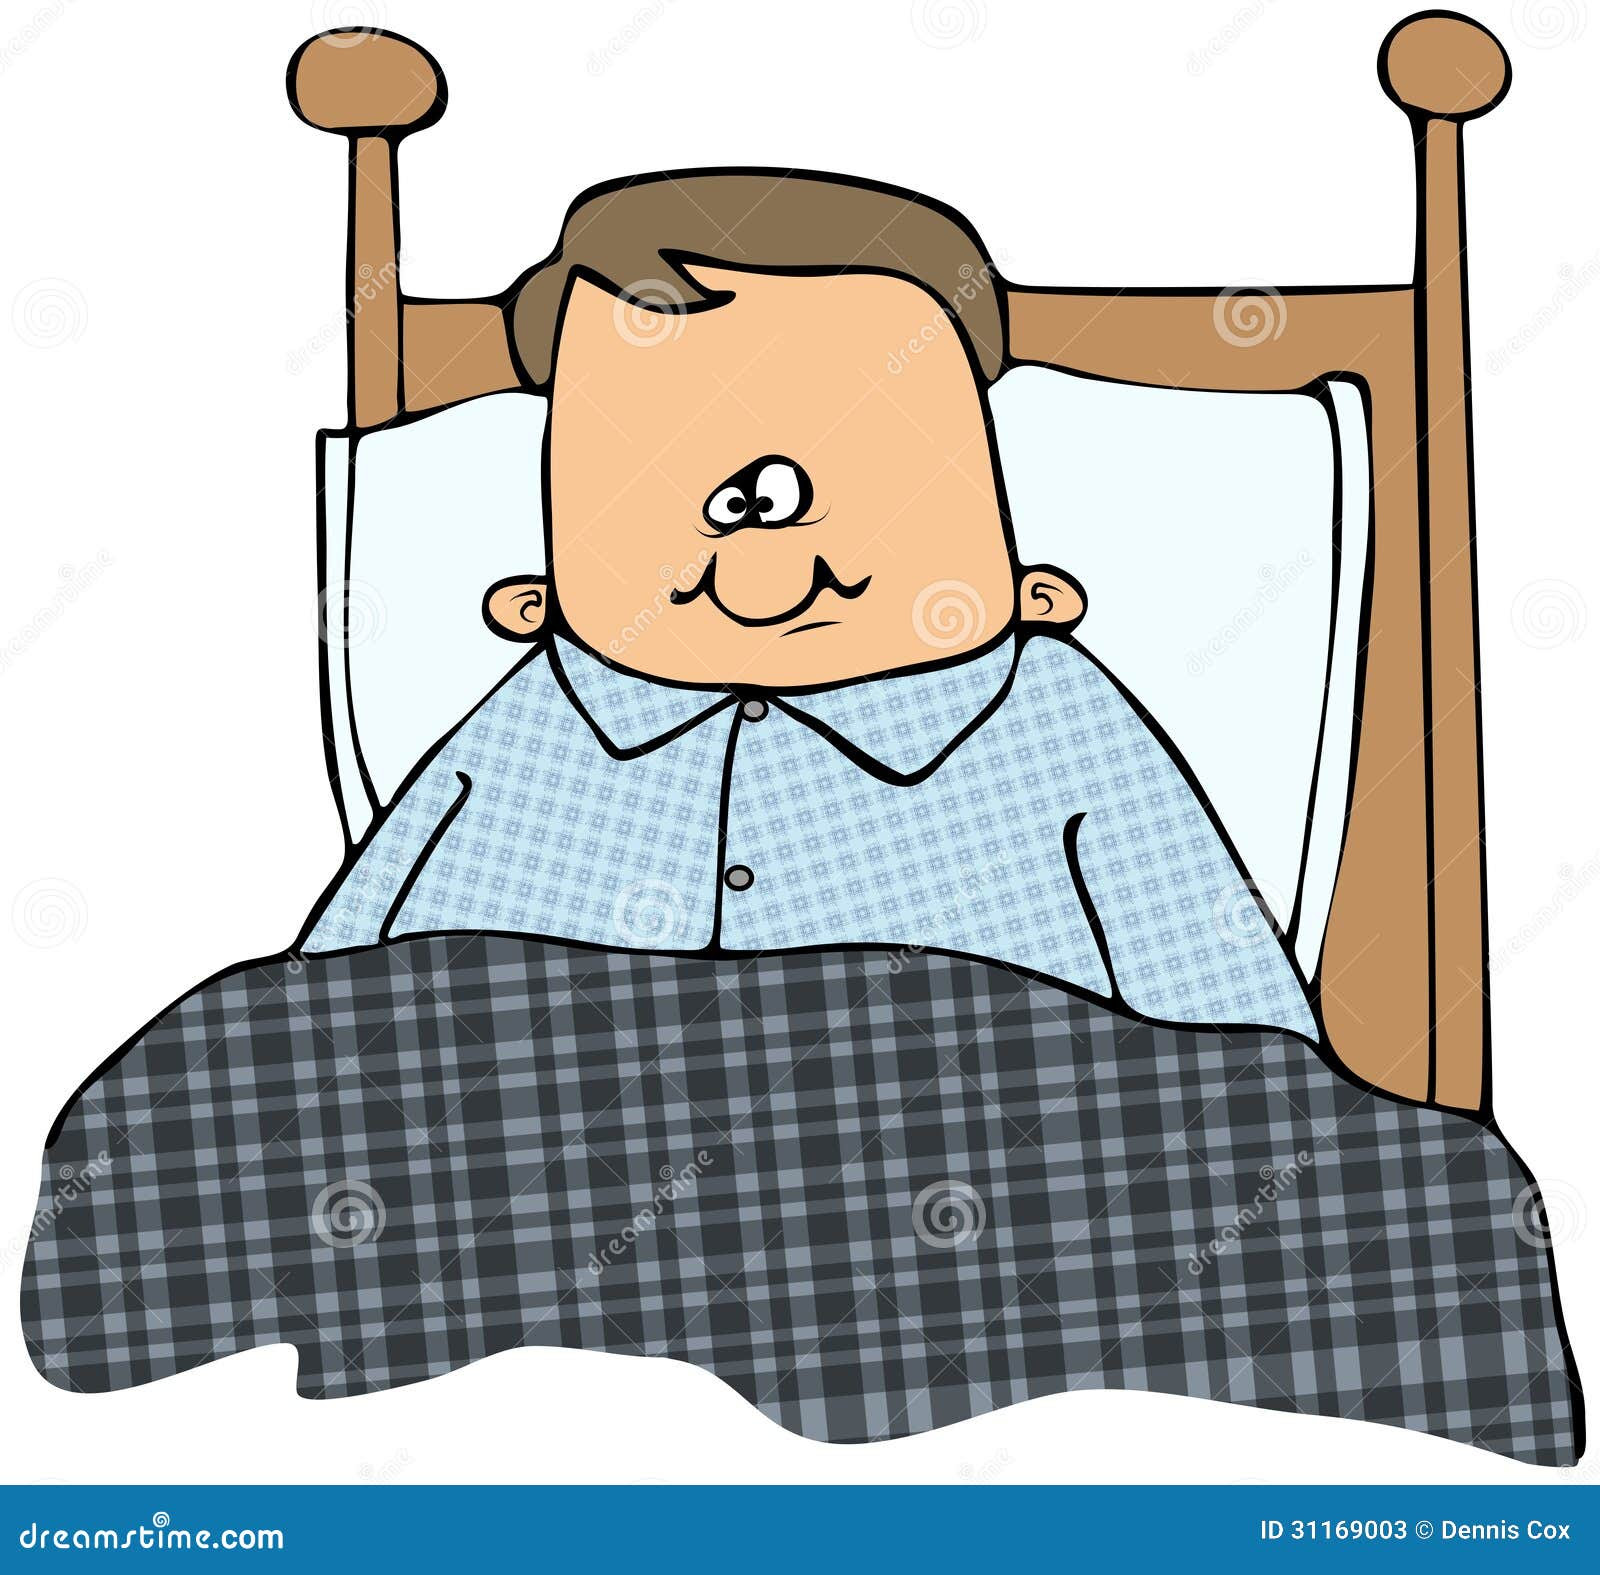 ... illustration depicts a boy wearing blue pajamas sitting up in bed